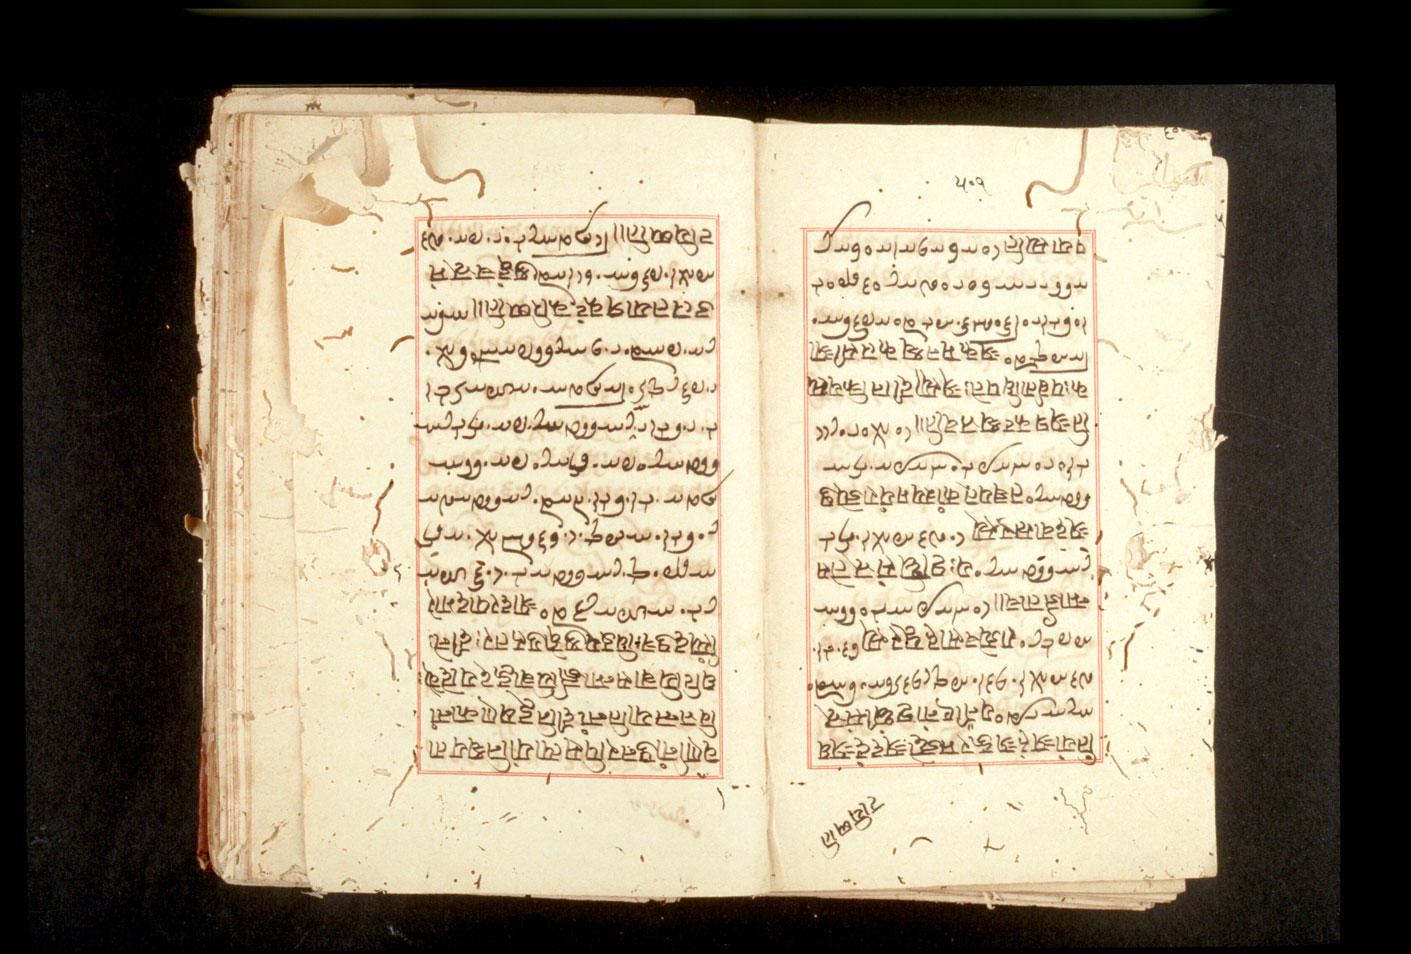 Folios 501v (right) and 502r (left)